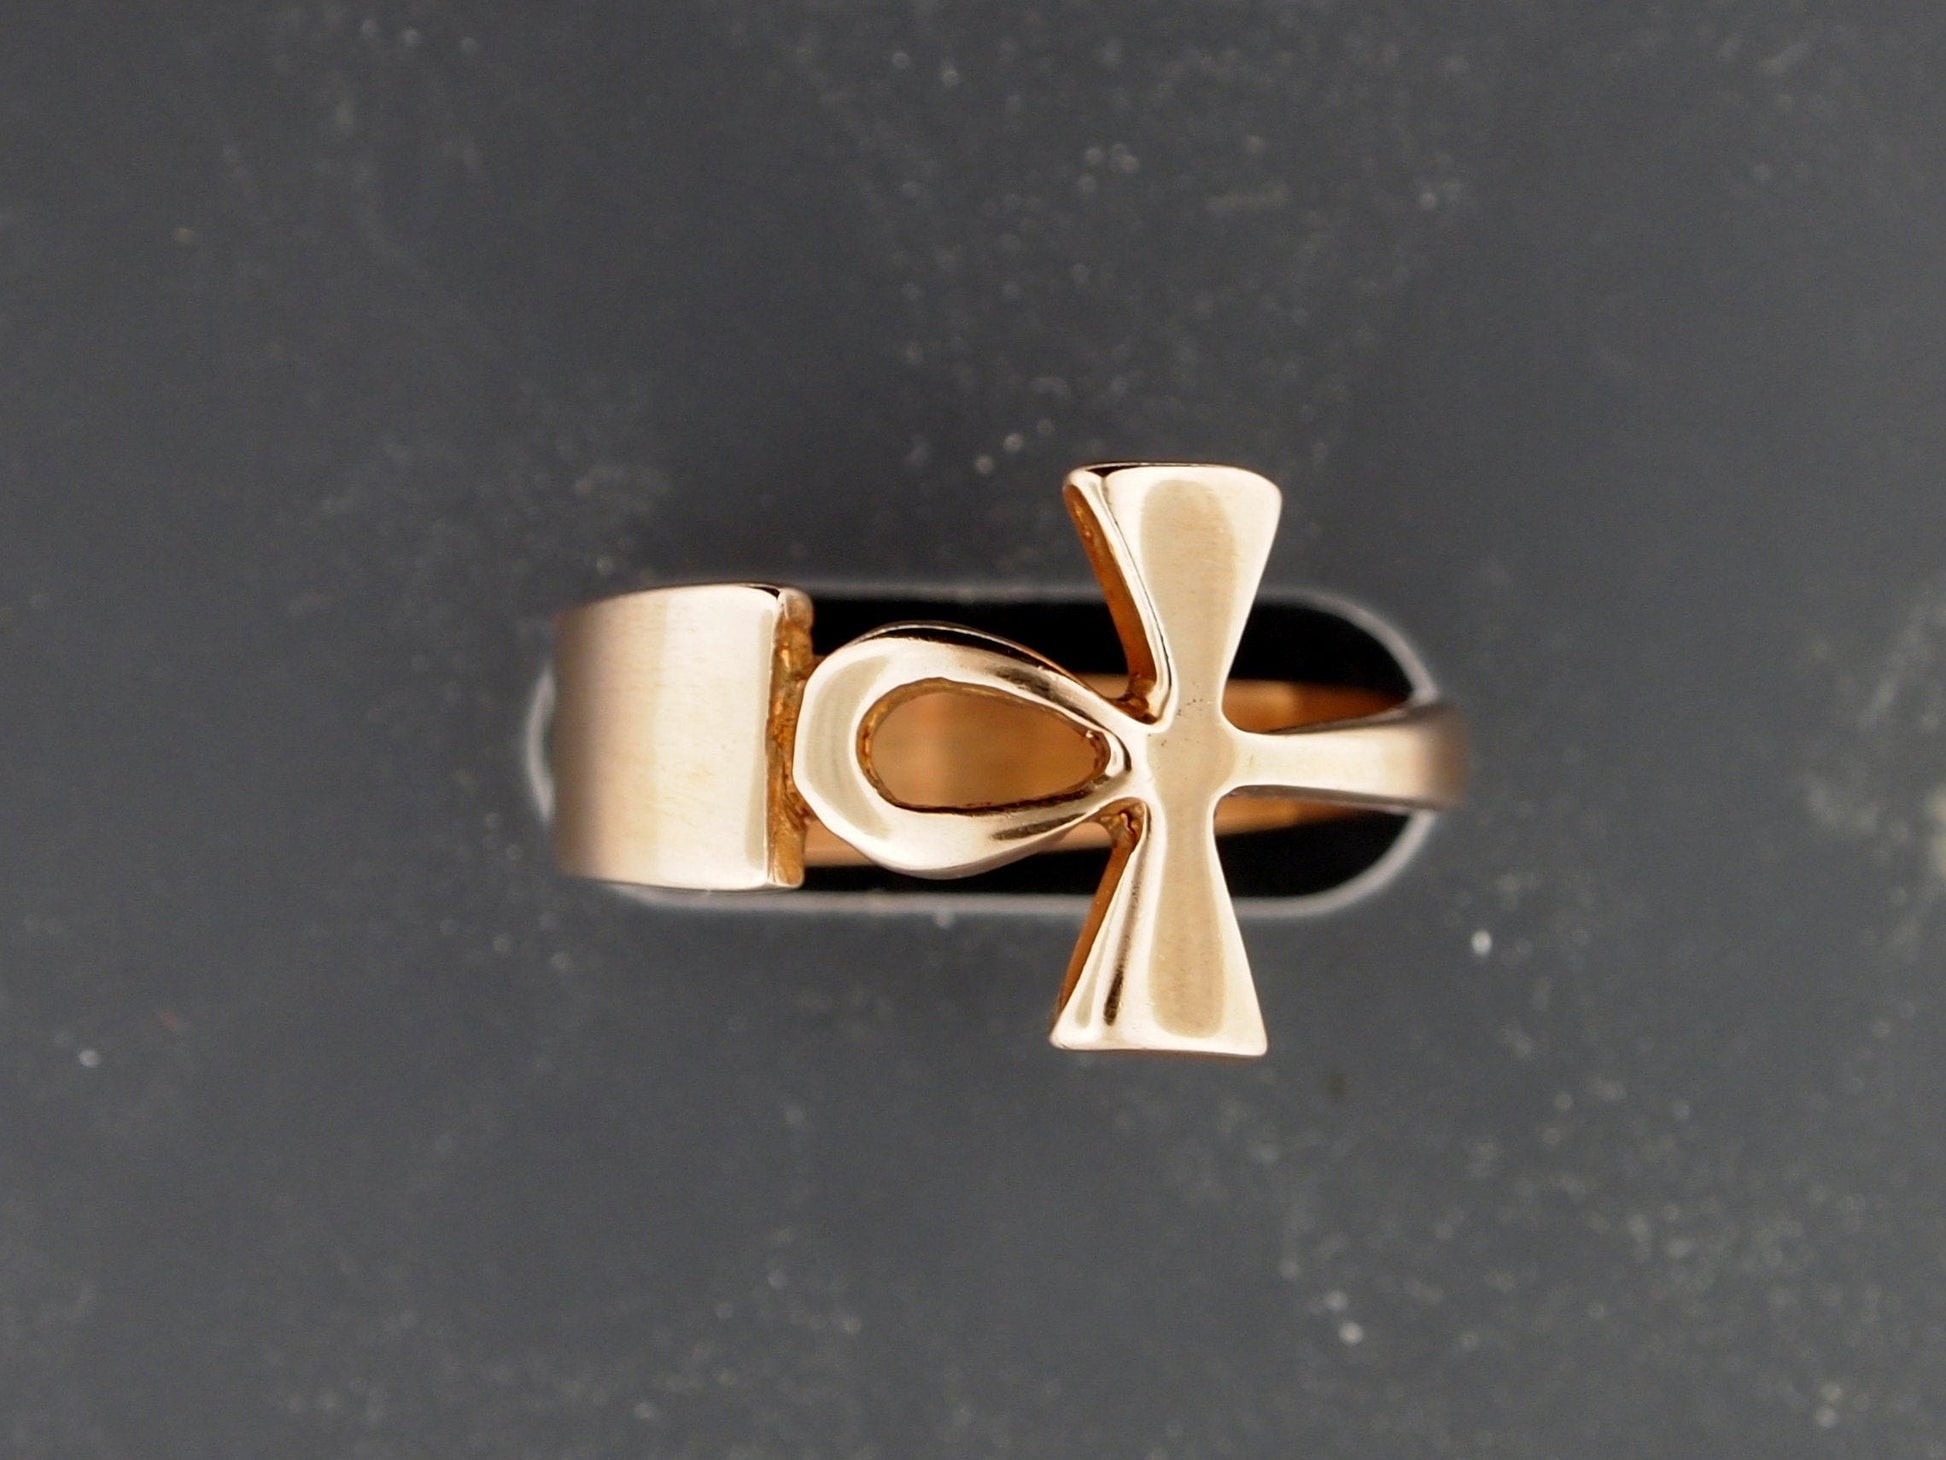 Wrap Around Ankh Ring in Sterling Silver or Antique Bronze, Bronze Ankh Ring, Egyptian Style Ring, Eternal Life Ring, Egyptian Key Ring, Bronze Egyptian Jewelry, Bronze Egyptian Jewellery, Bronze Egyptian Ring, Ankh Ring In Antique Bronze